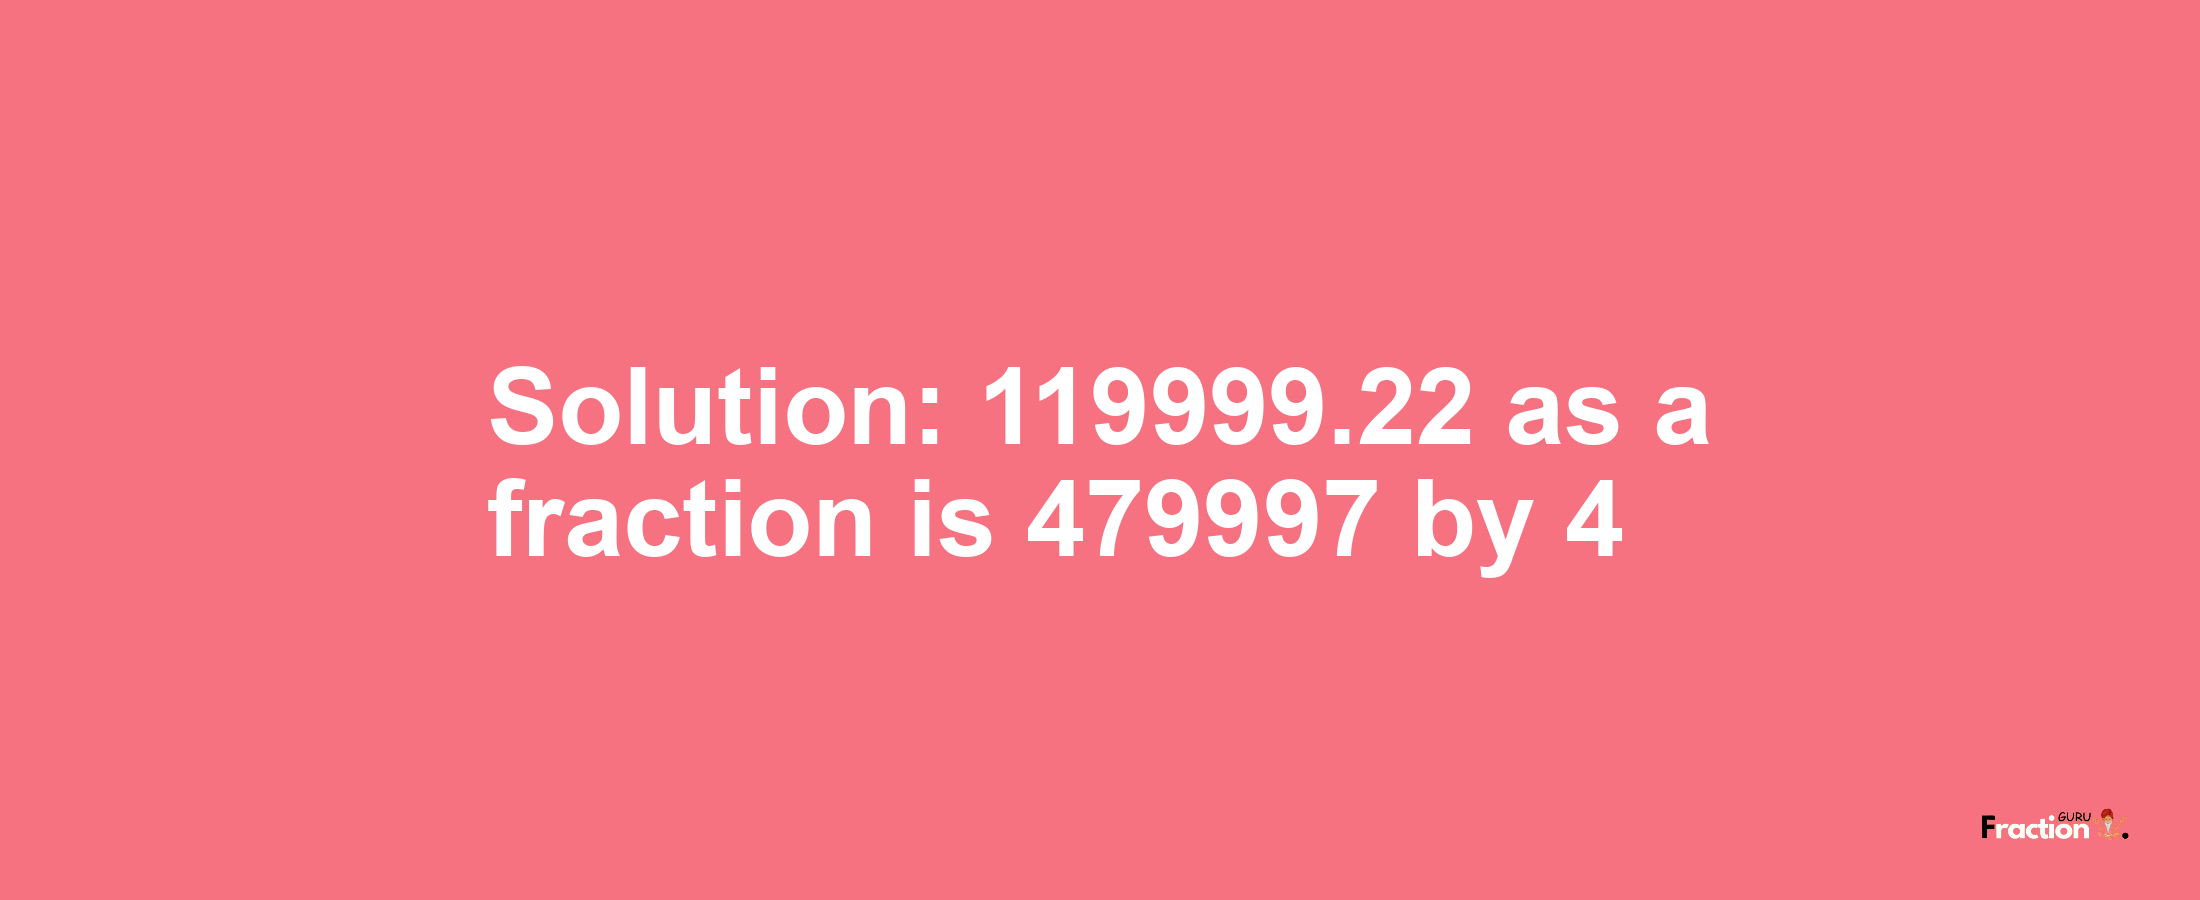 Solution:119999.22 as a fraction is 479997/4